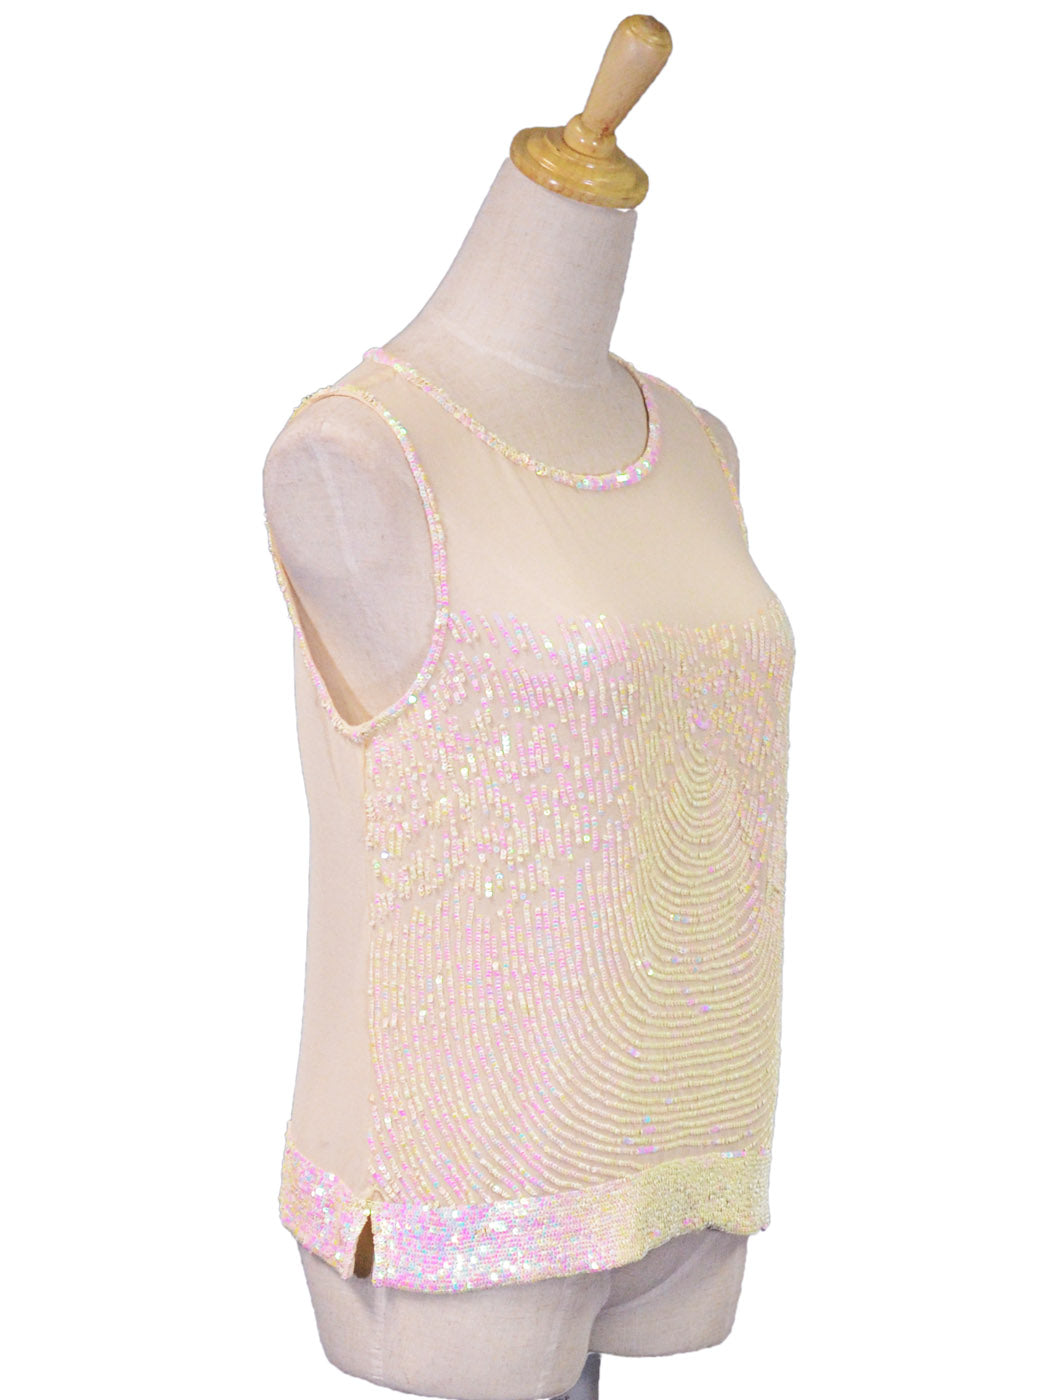 Ligali Dressy Sleeveless Loose Fitted Top With Mesh Neckline And Sequin Design - ALILANG.COM